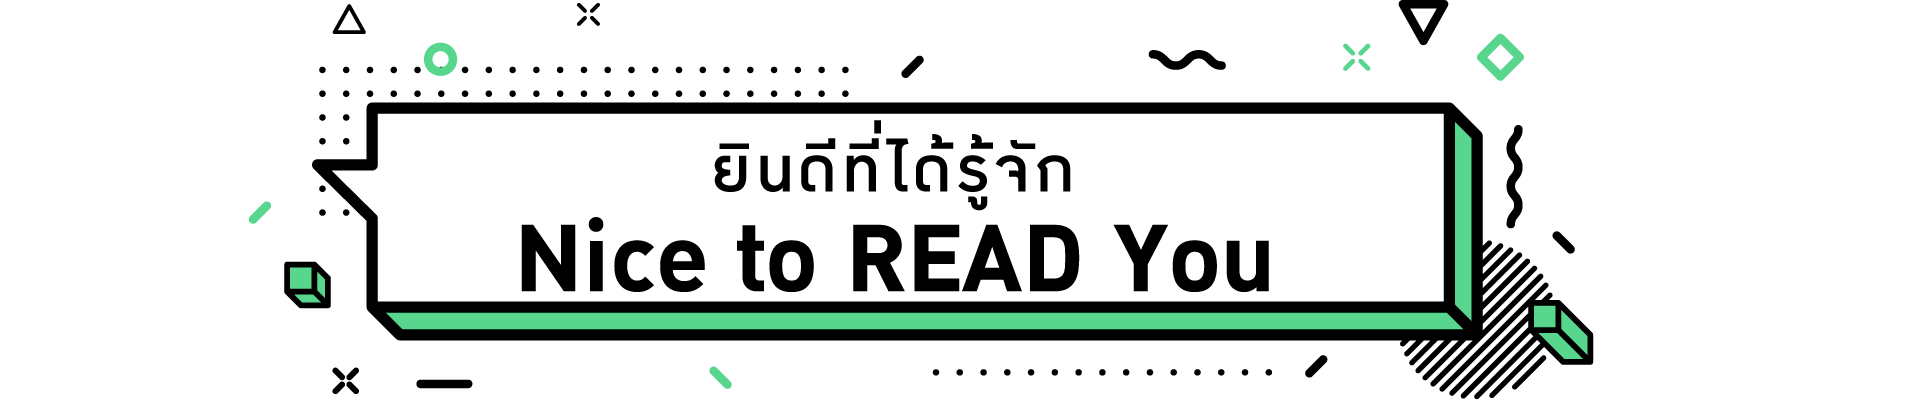 20210625 nice to Read you